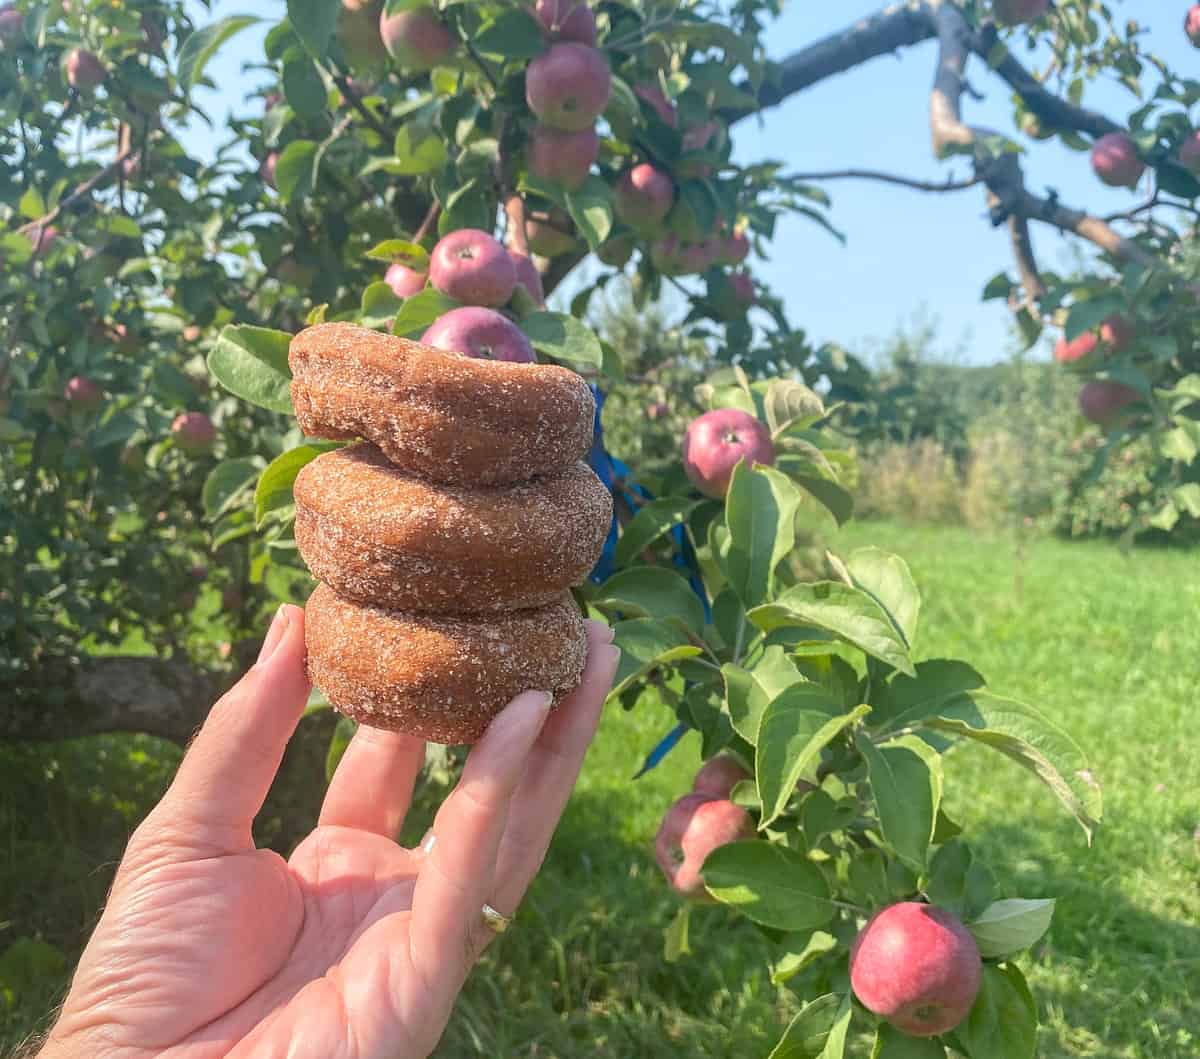 Hand holding three sugar coated donuts in front of apple trees.